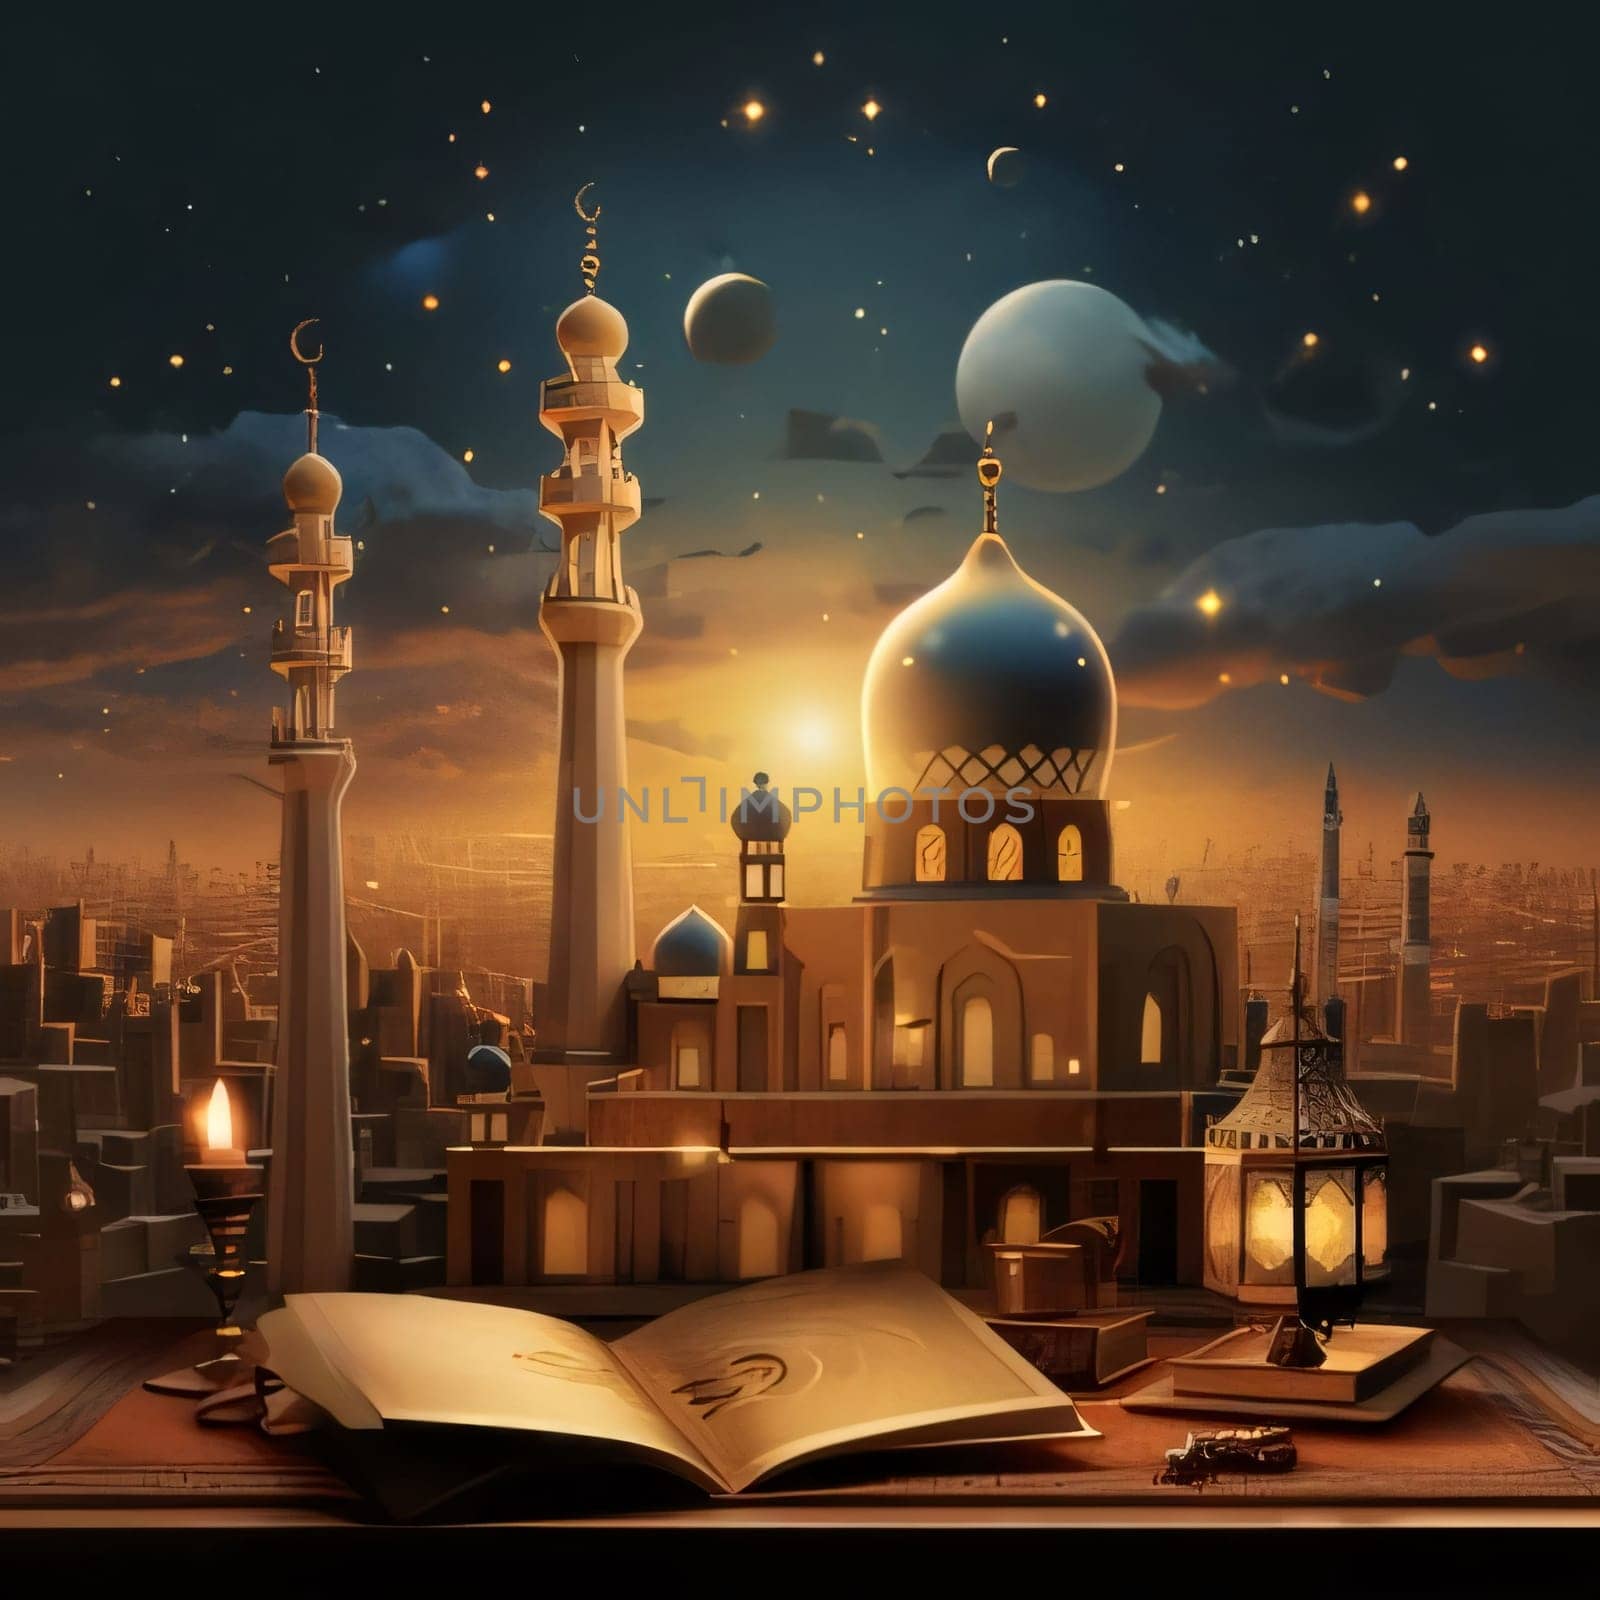 Illustration of an open book lantern and a view of a mosque with minarets at night. Mosque as a place of prayer for Muslims. by ThemesS